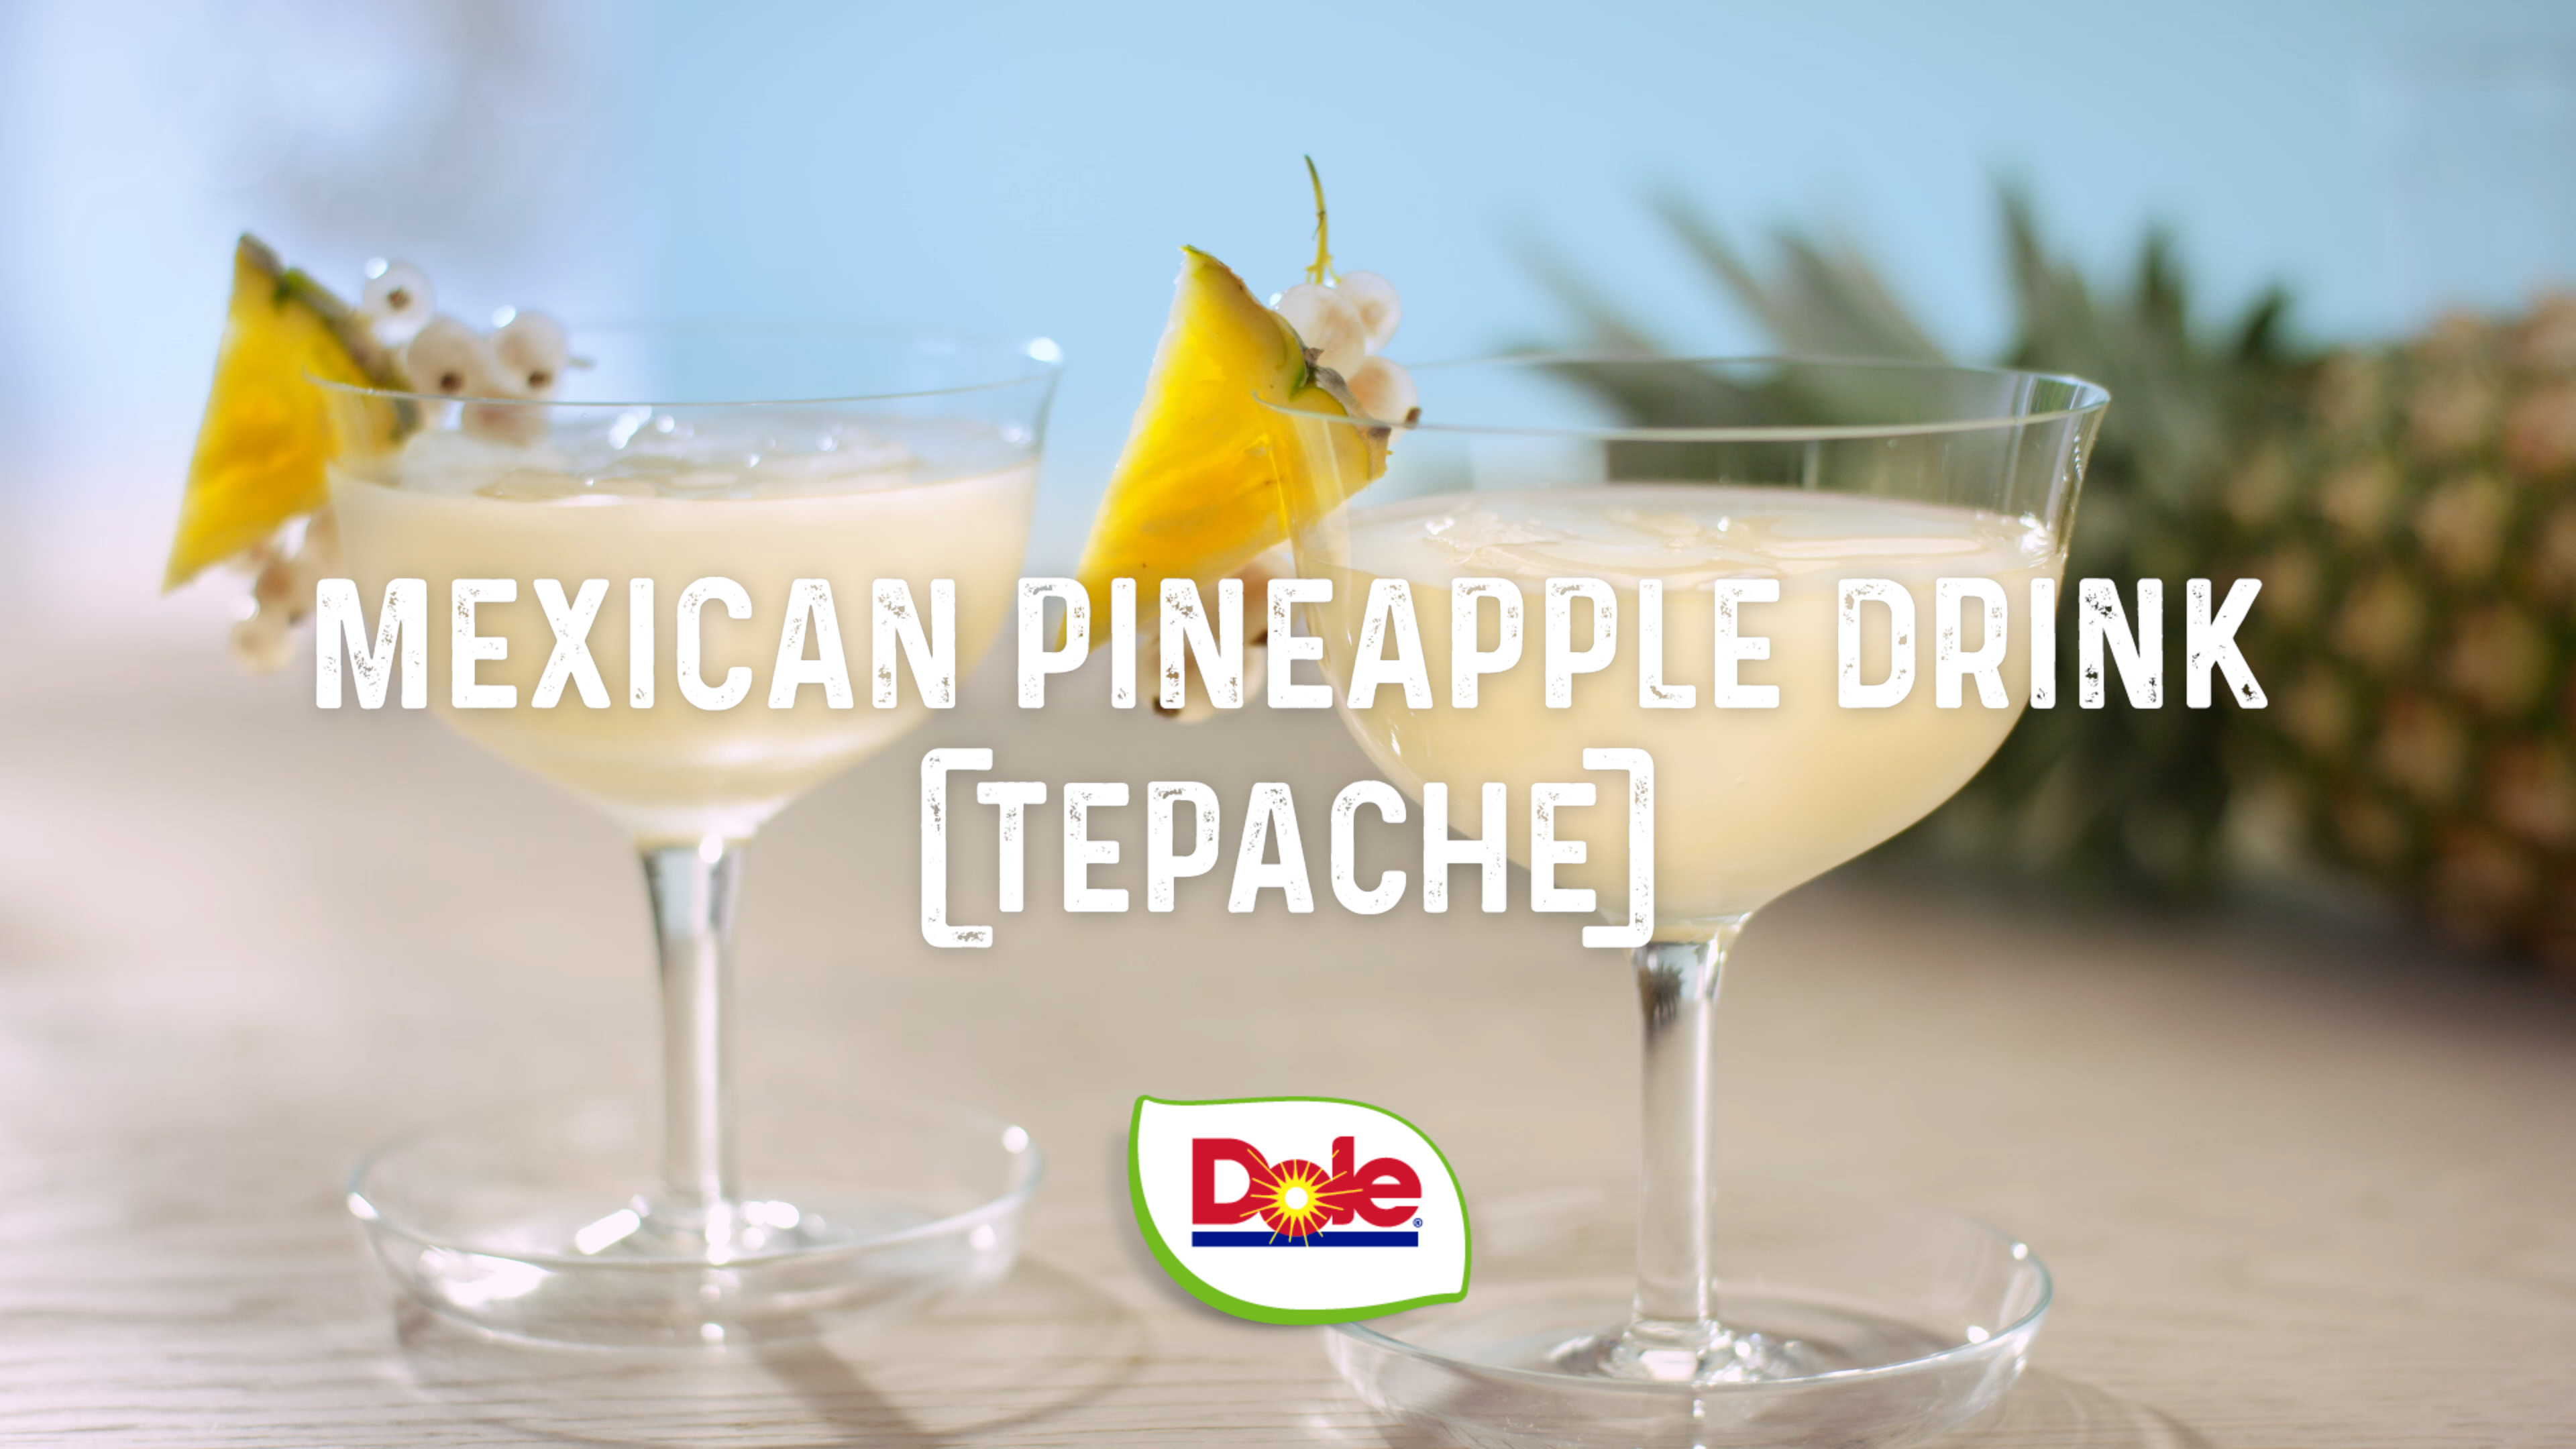 Mexican pineapple drink (Tepache)